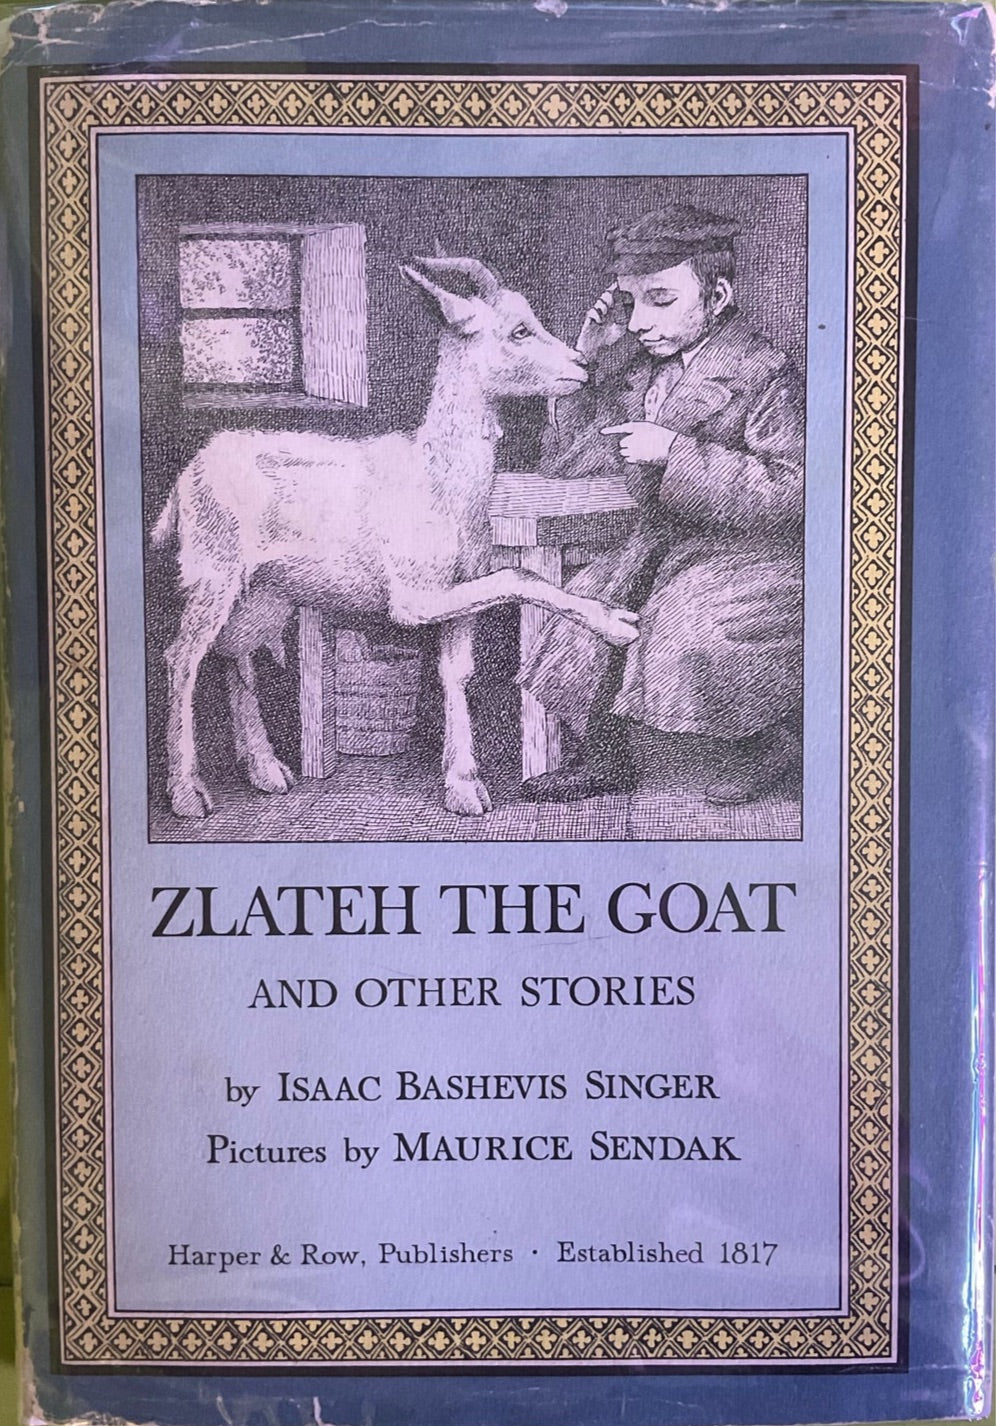 Zlateh the Goat and Other Stories, Isaac Bashevis Singer and Maurice Sendak